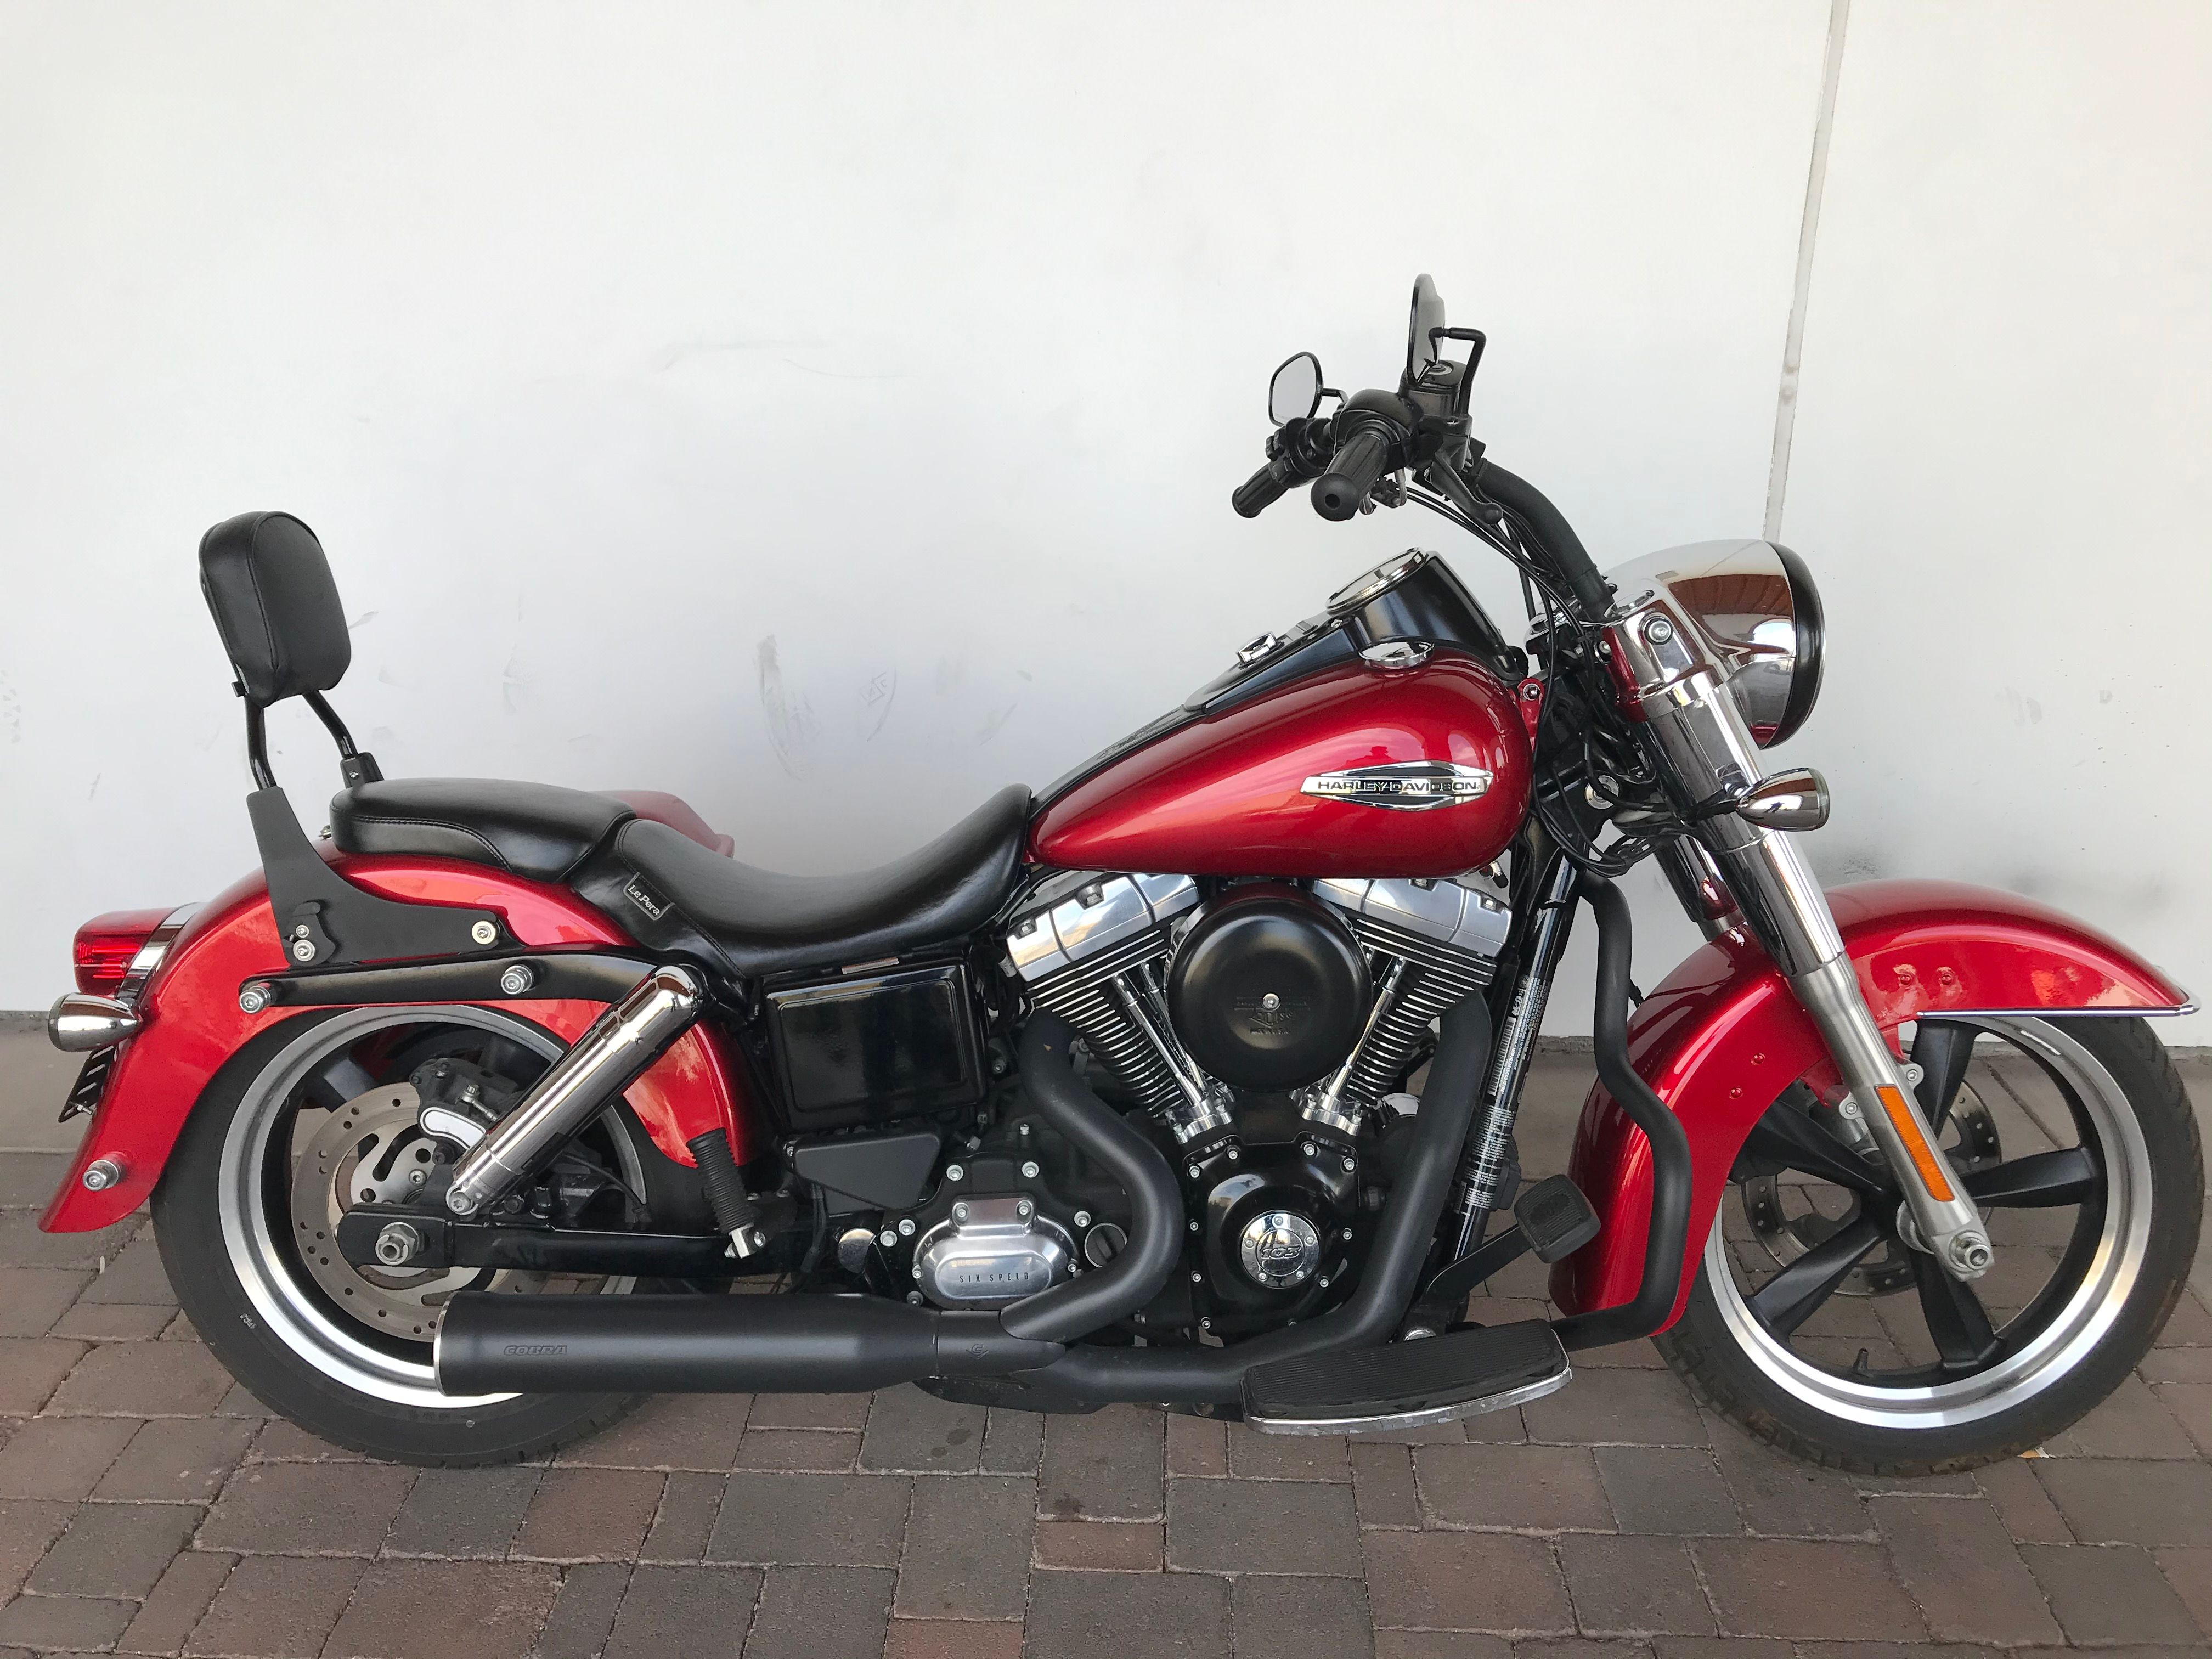 Pre-Owned 2012 Harley-Davidson Switchback in Tucson #UHD312792 | Old